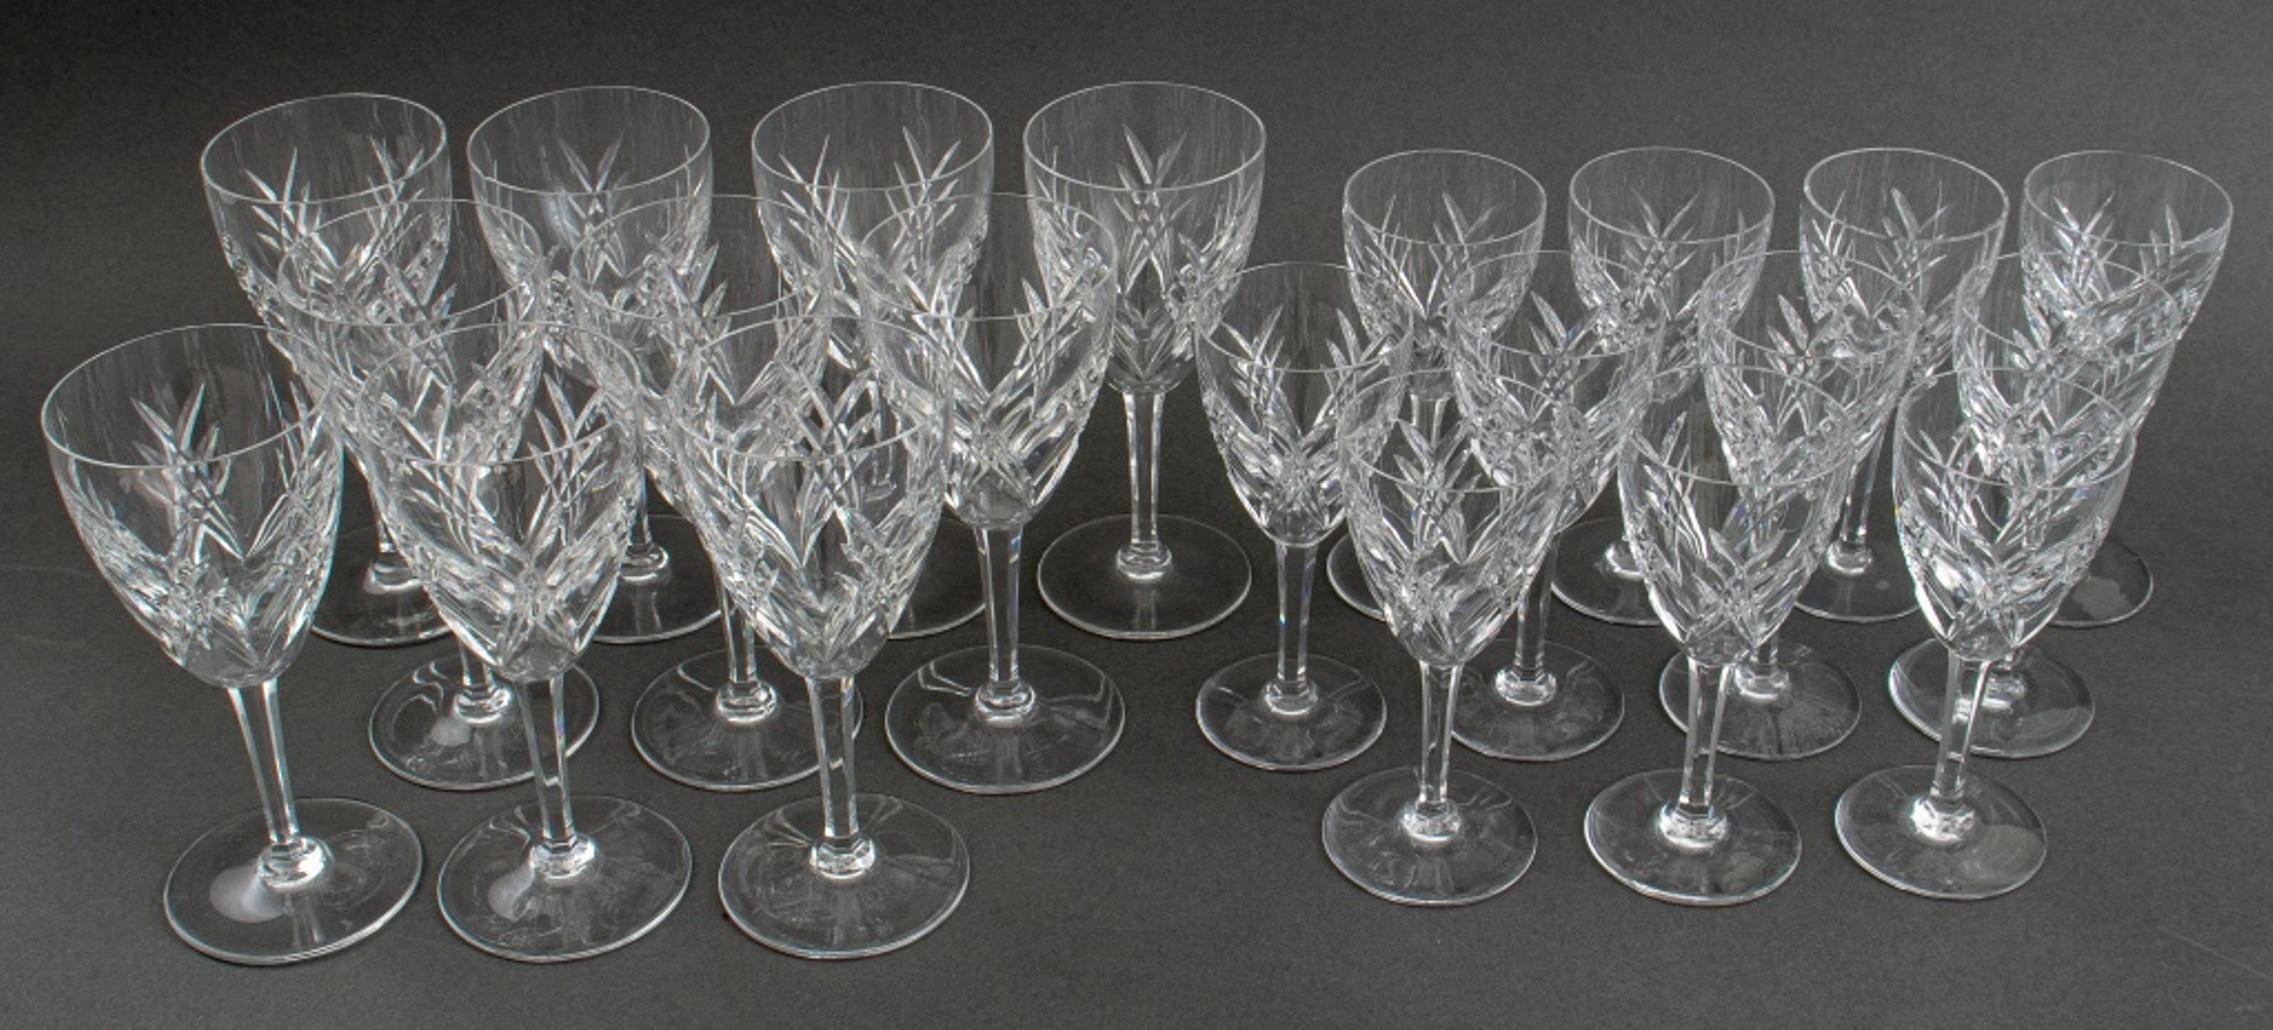 Etched Baccarat 